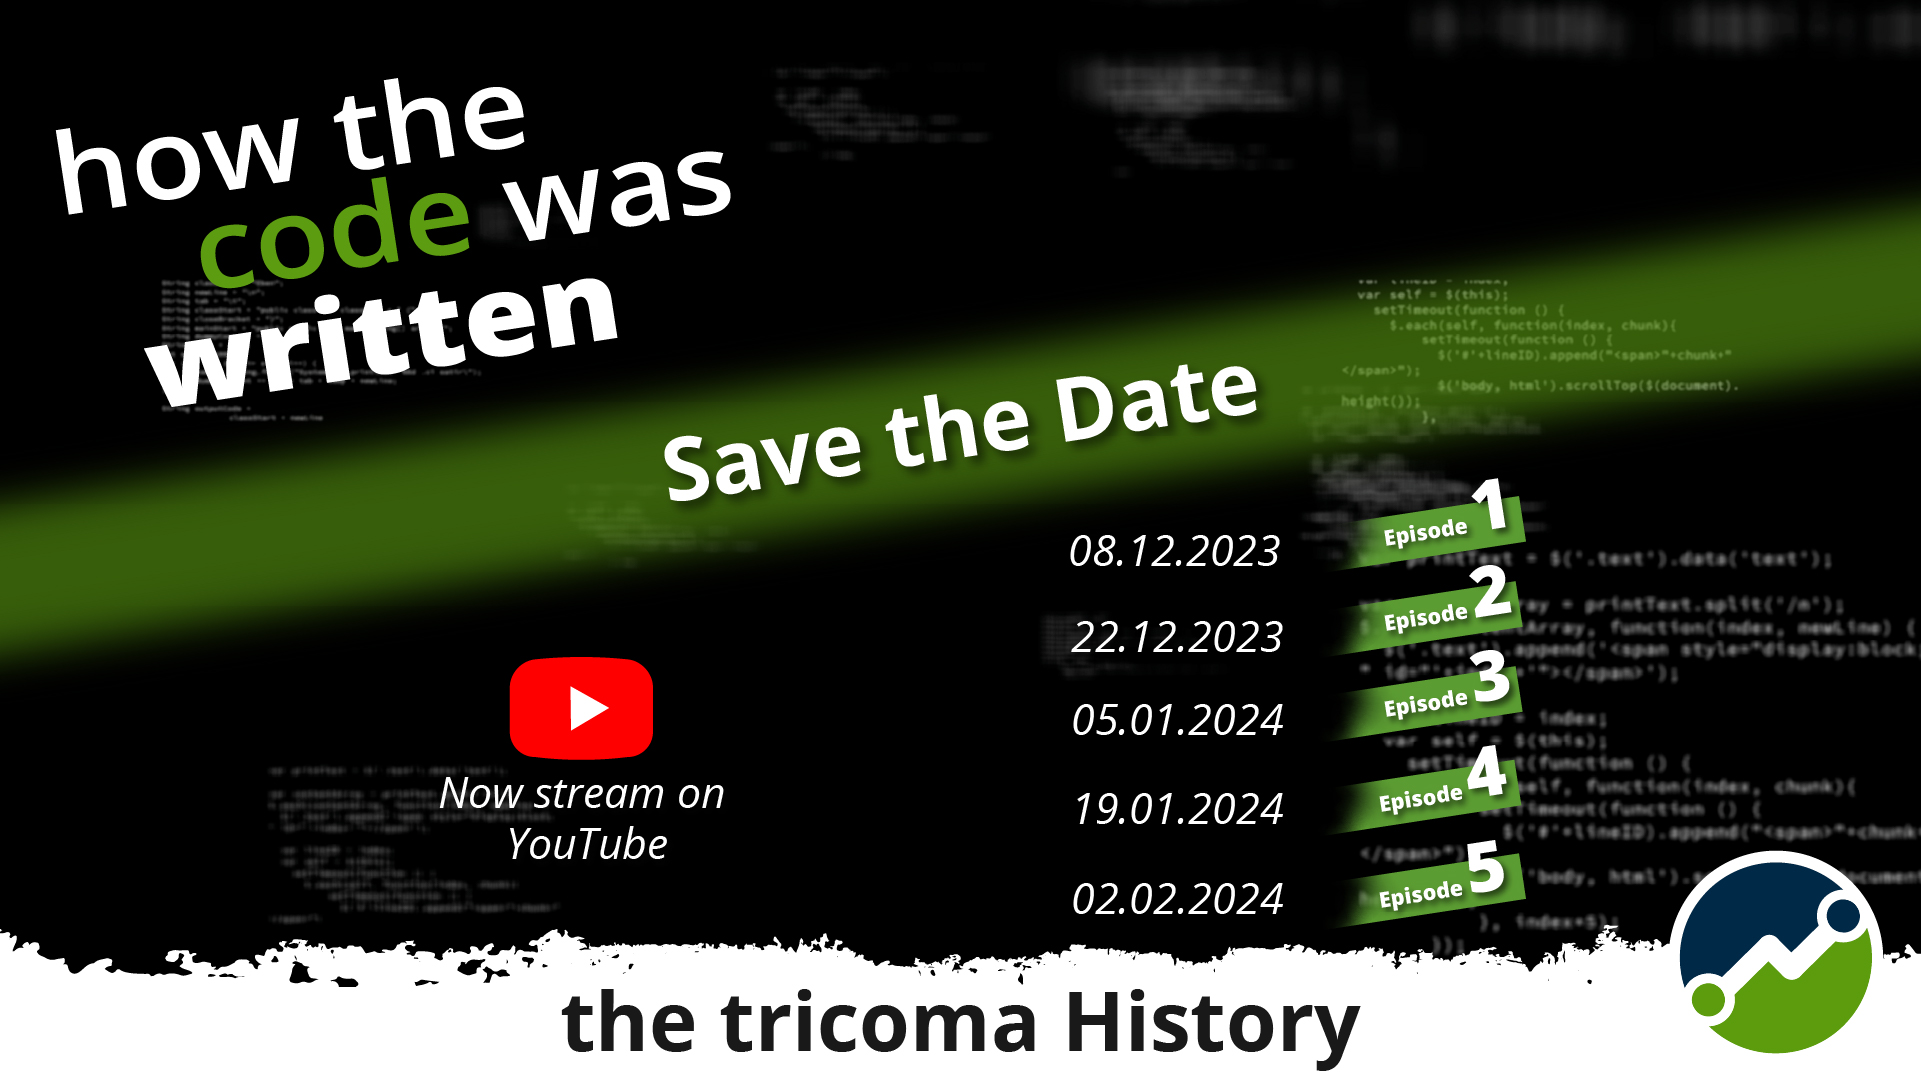 Save the Date! Wann kommt How the code was written?